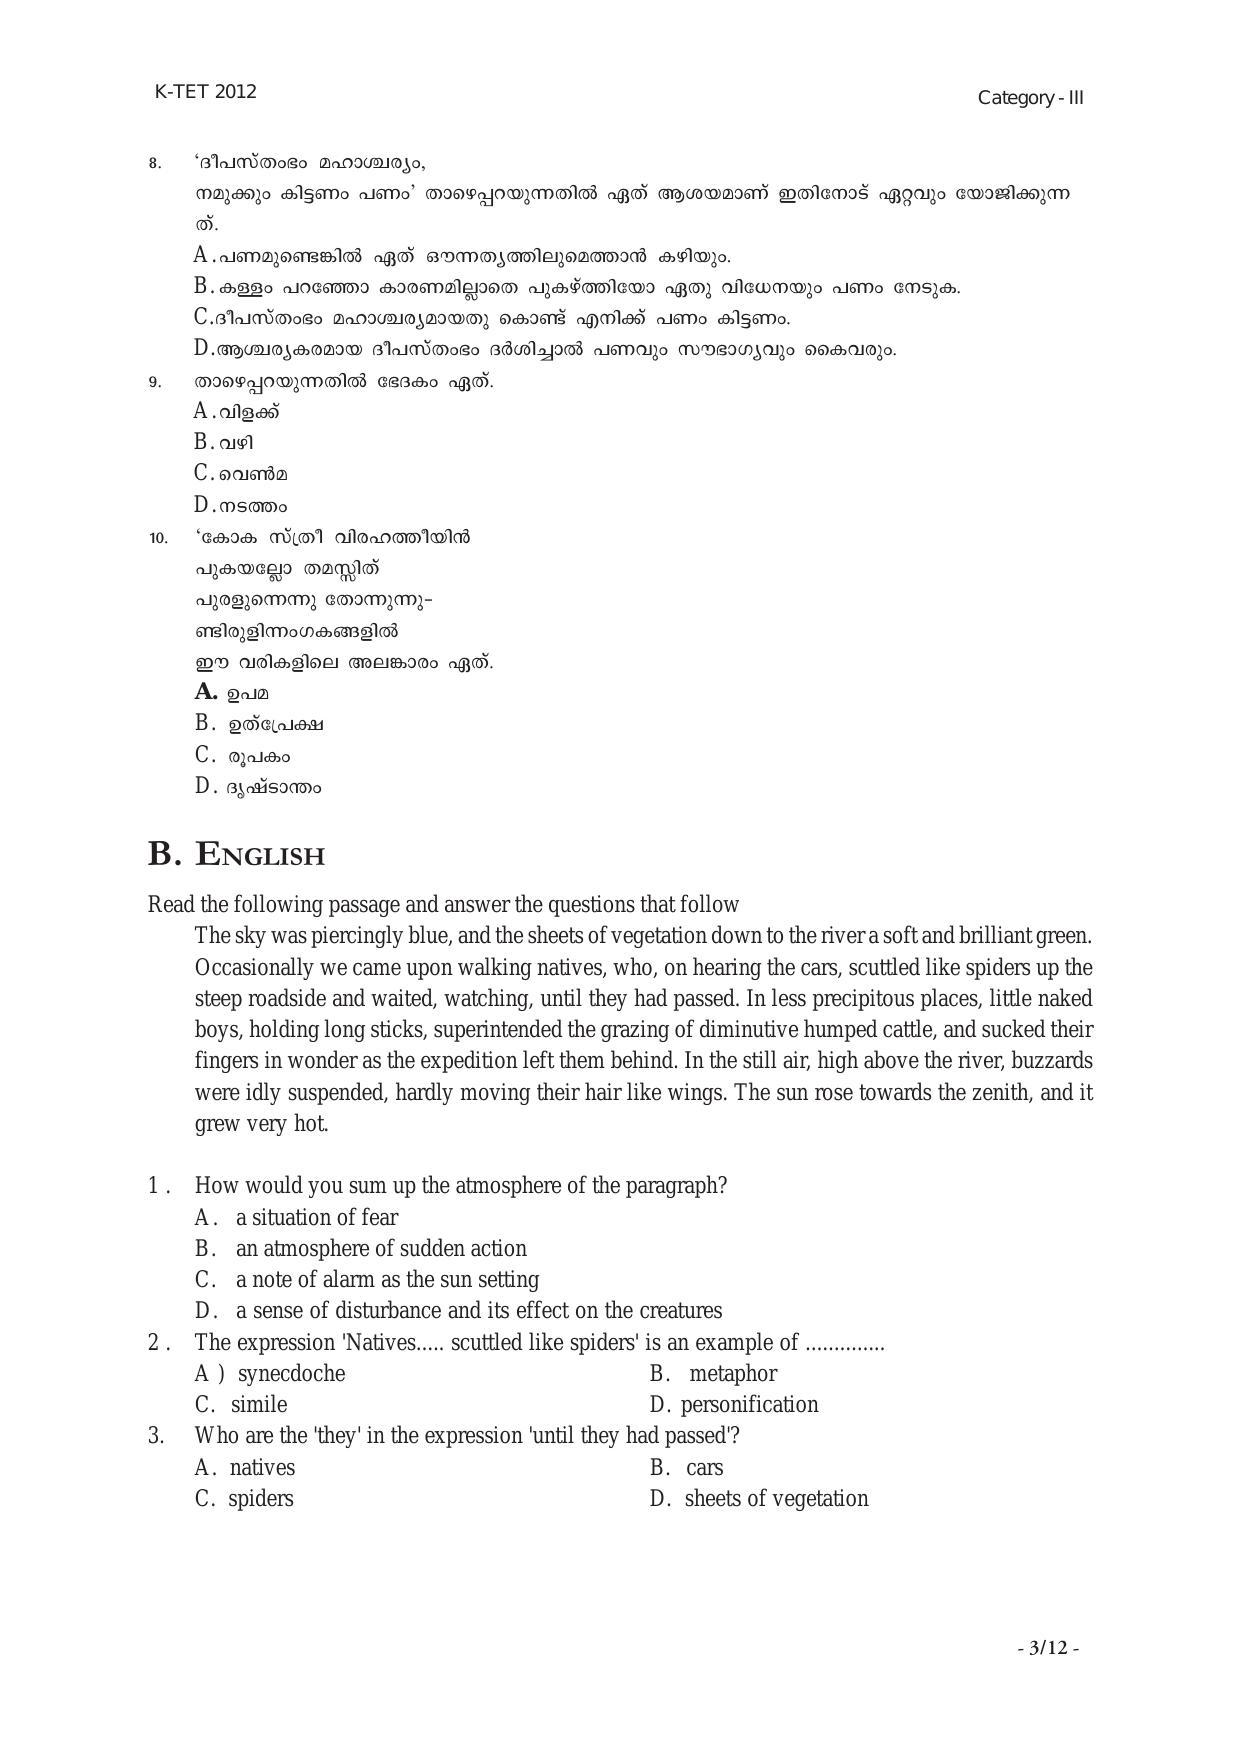 KTET Category III High School Teacher (8 to 10) Exam Previous Papers - Page 12